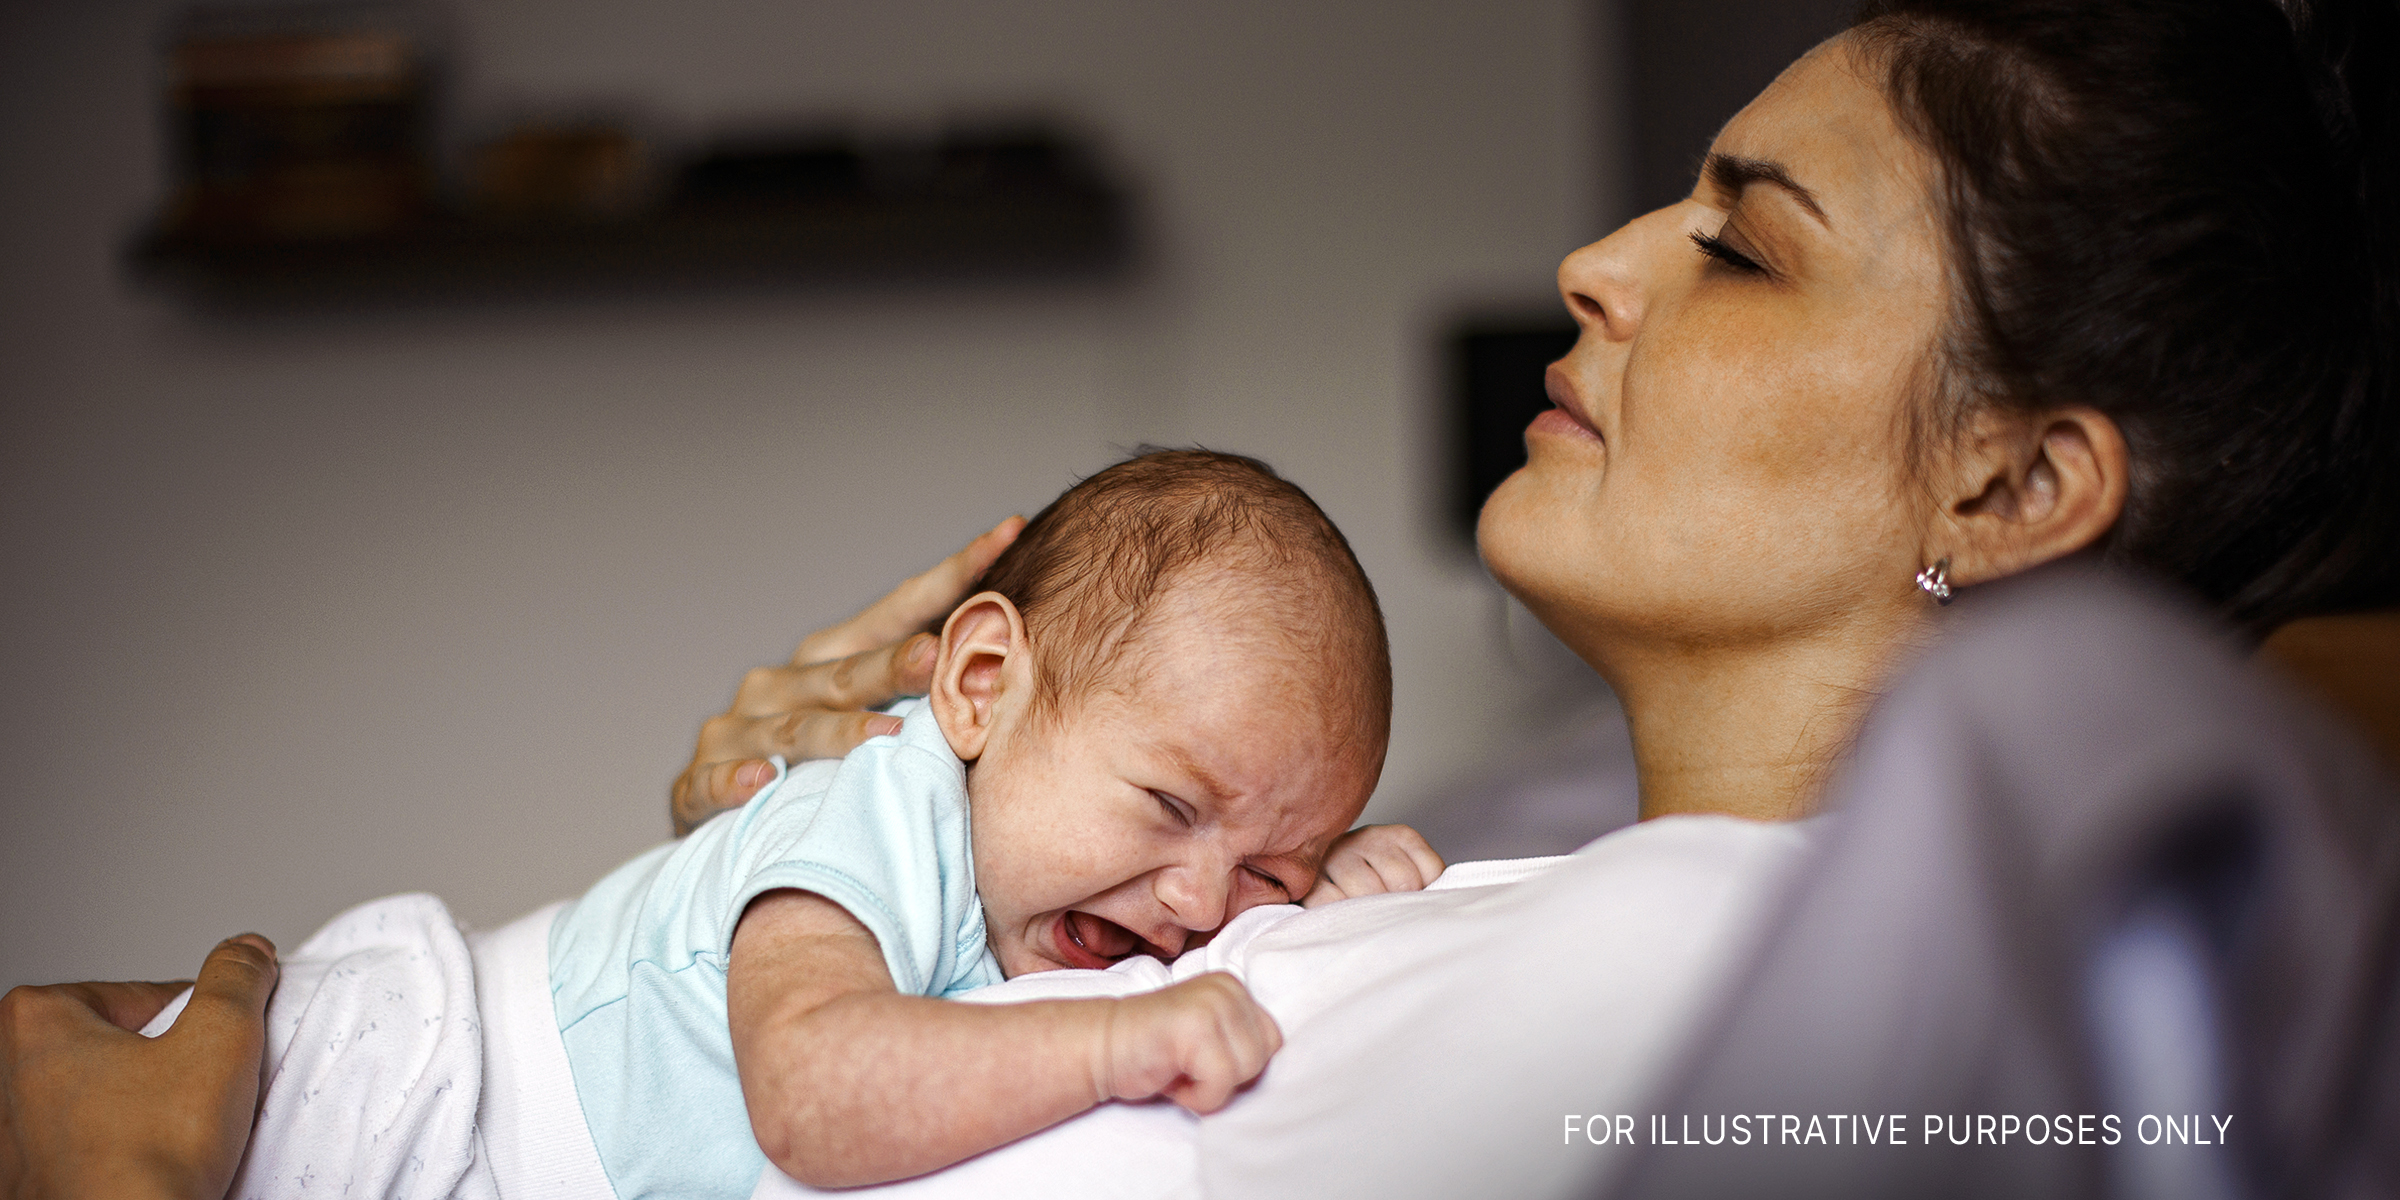 A distressed woman laying down with her crying baby on her chest | Source: Getty Images